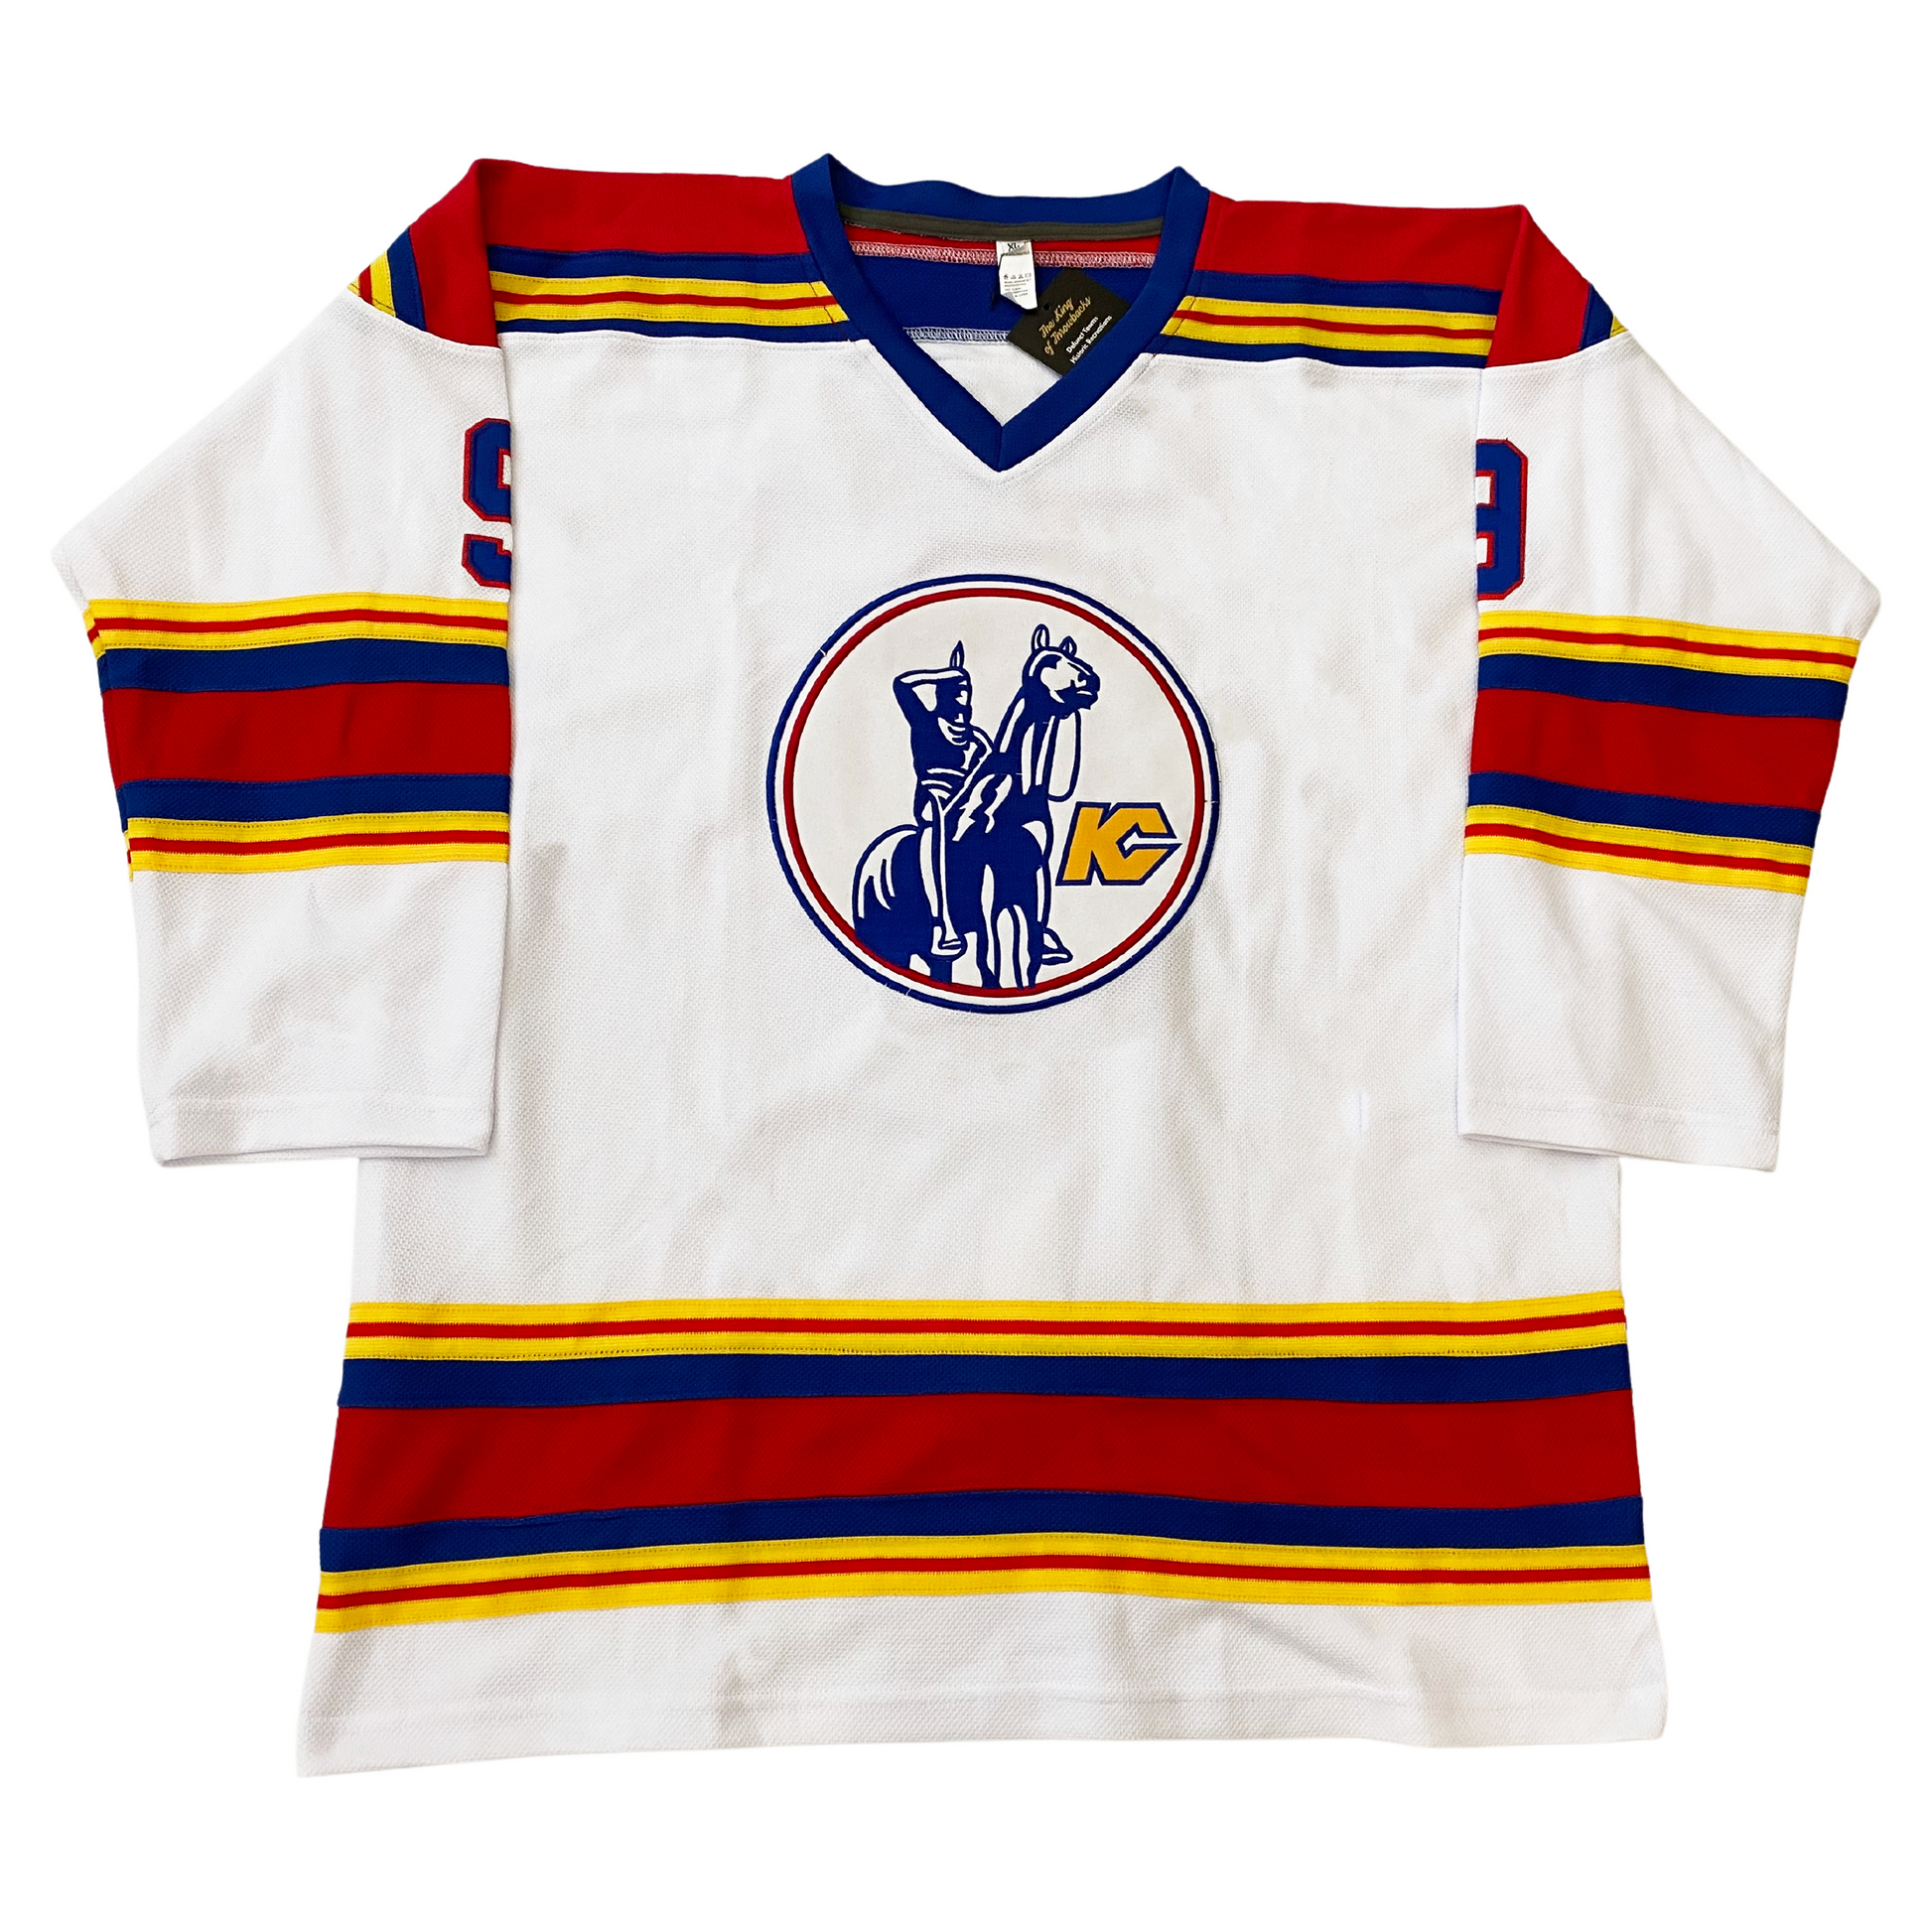 Kansas City Scouts Throwback Jersey Concept. Let me know your